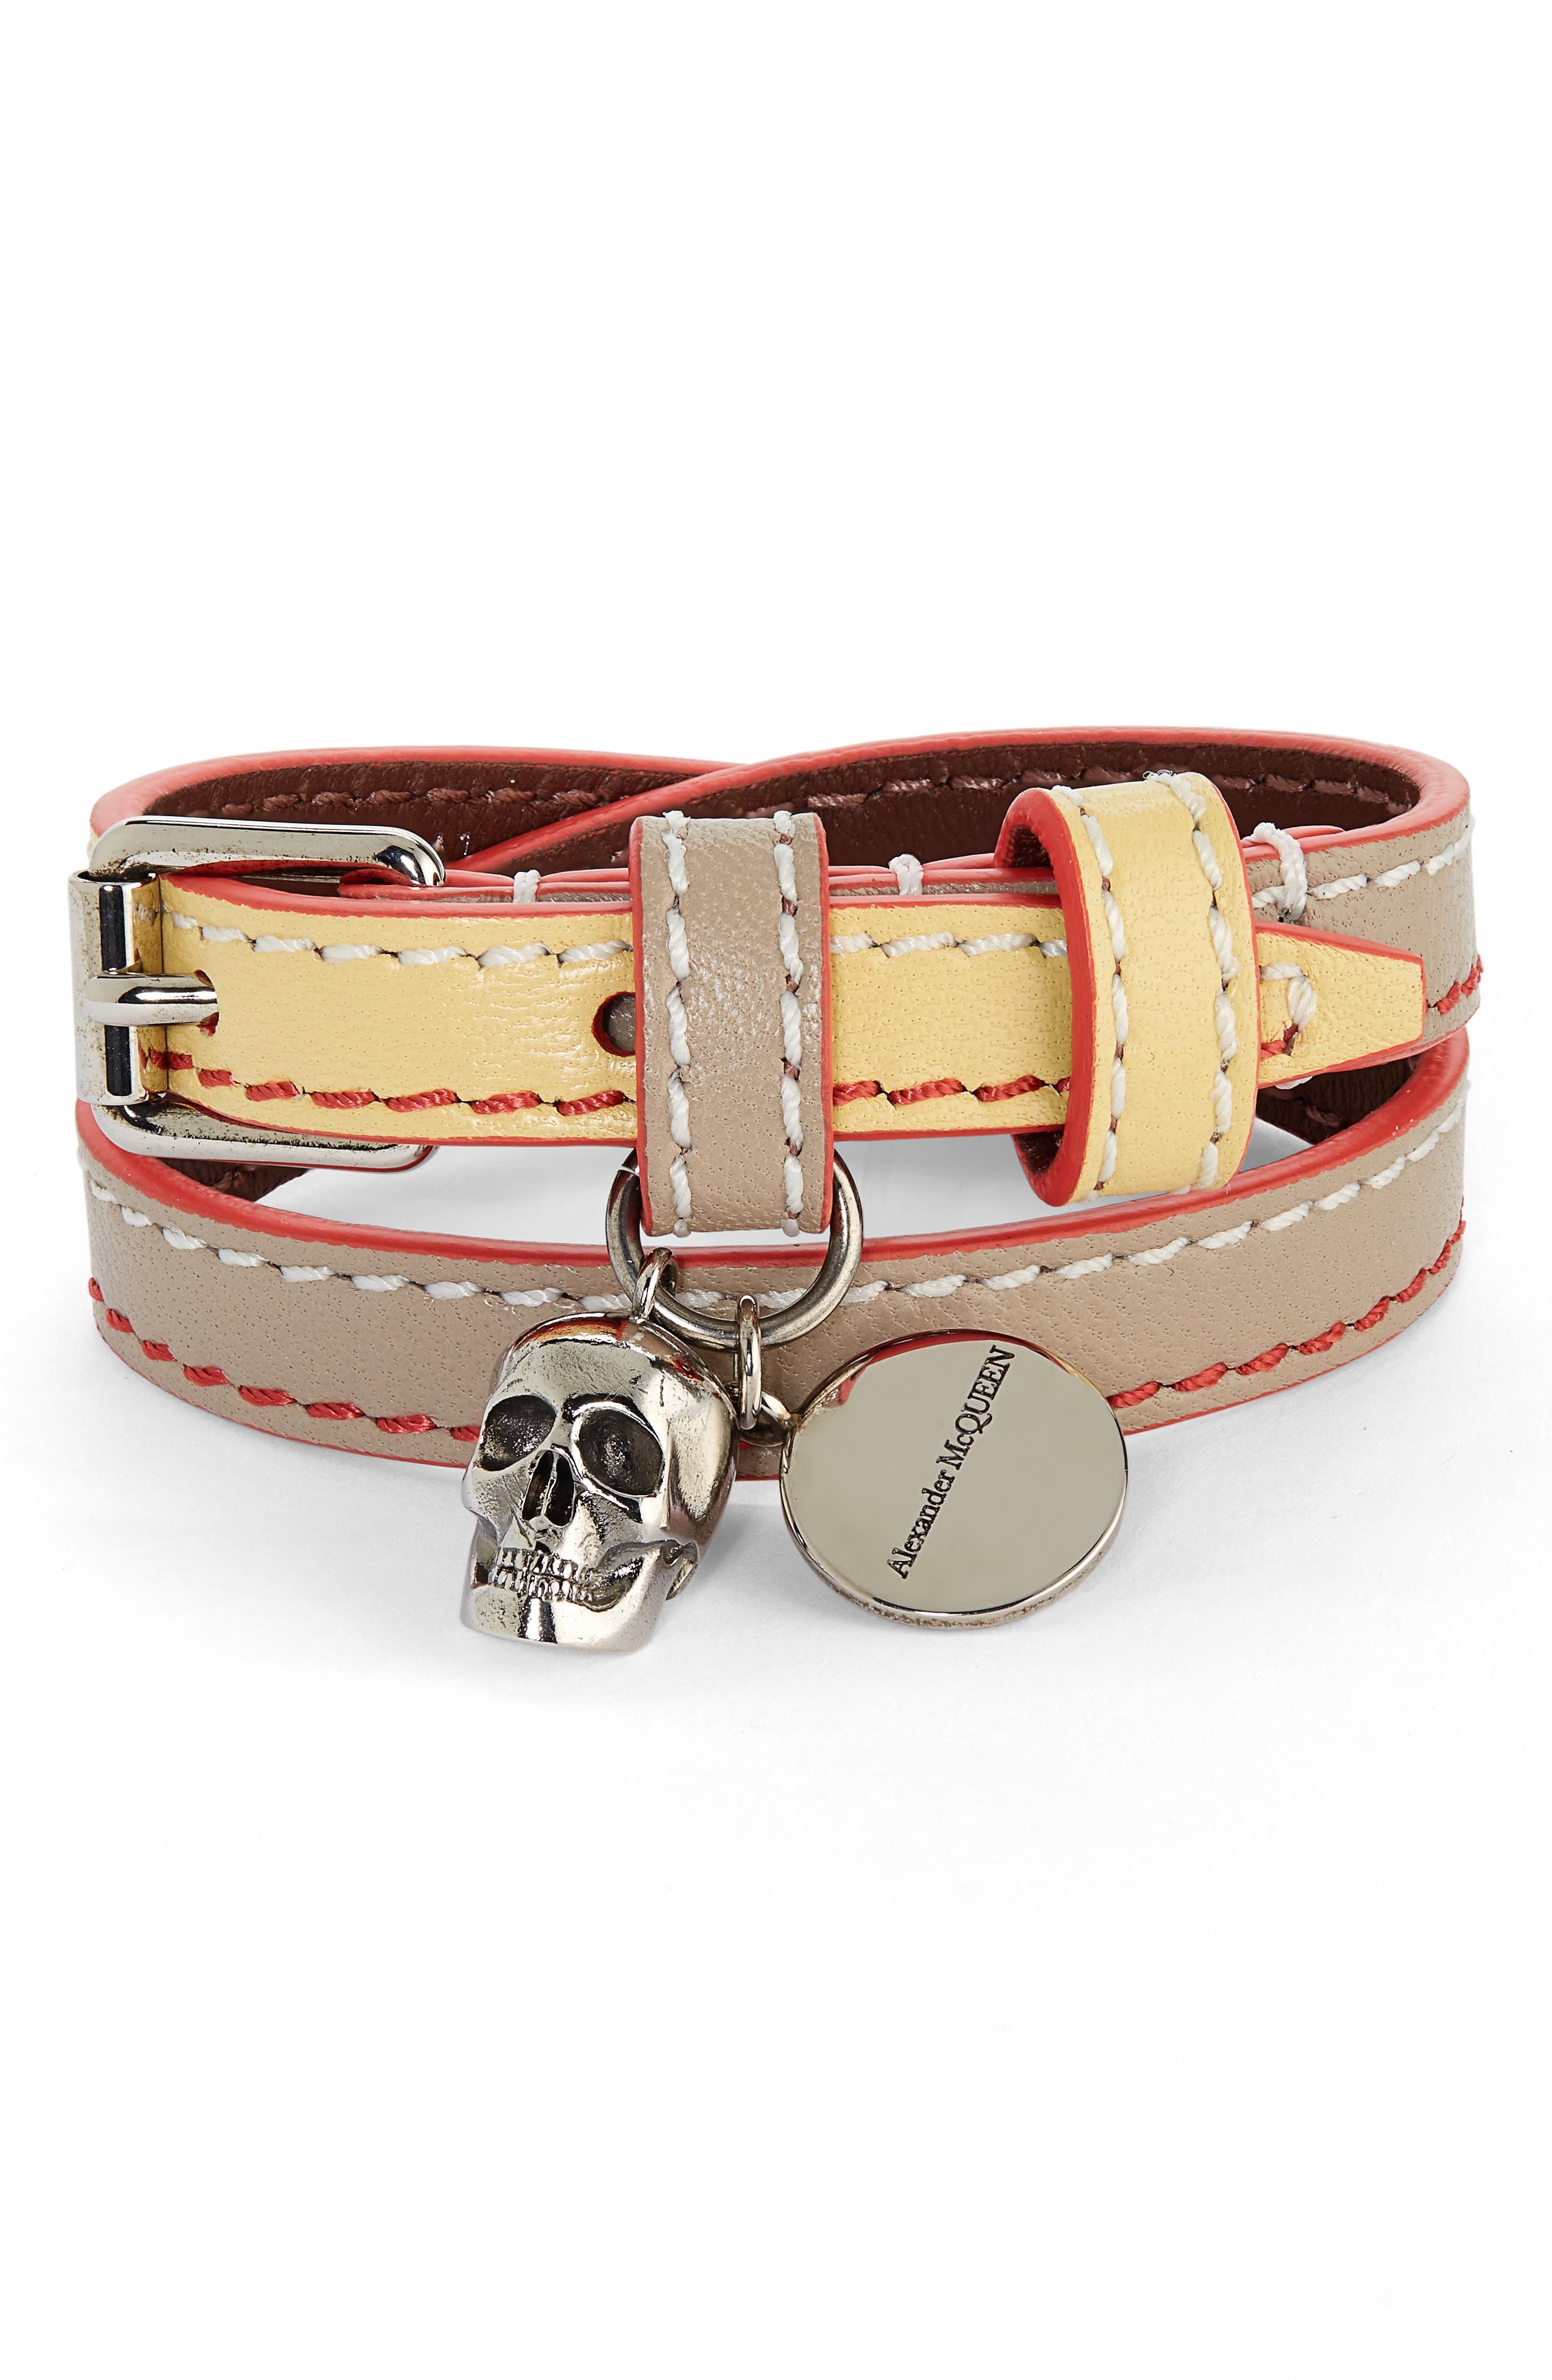 Double  Wrap Leather  Bracelet Snaskin Texture Genuine Leather Red and White Embossed  Leather